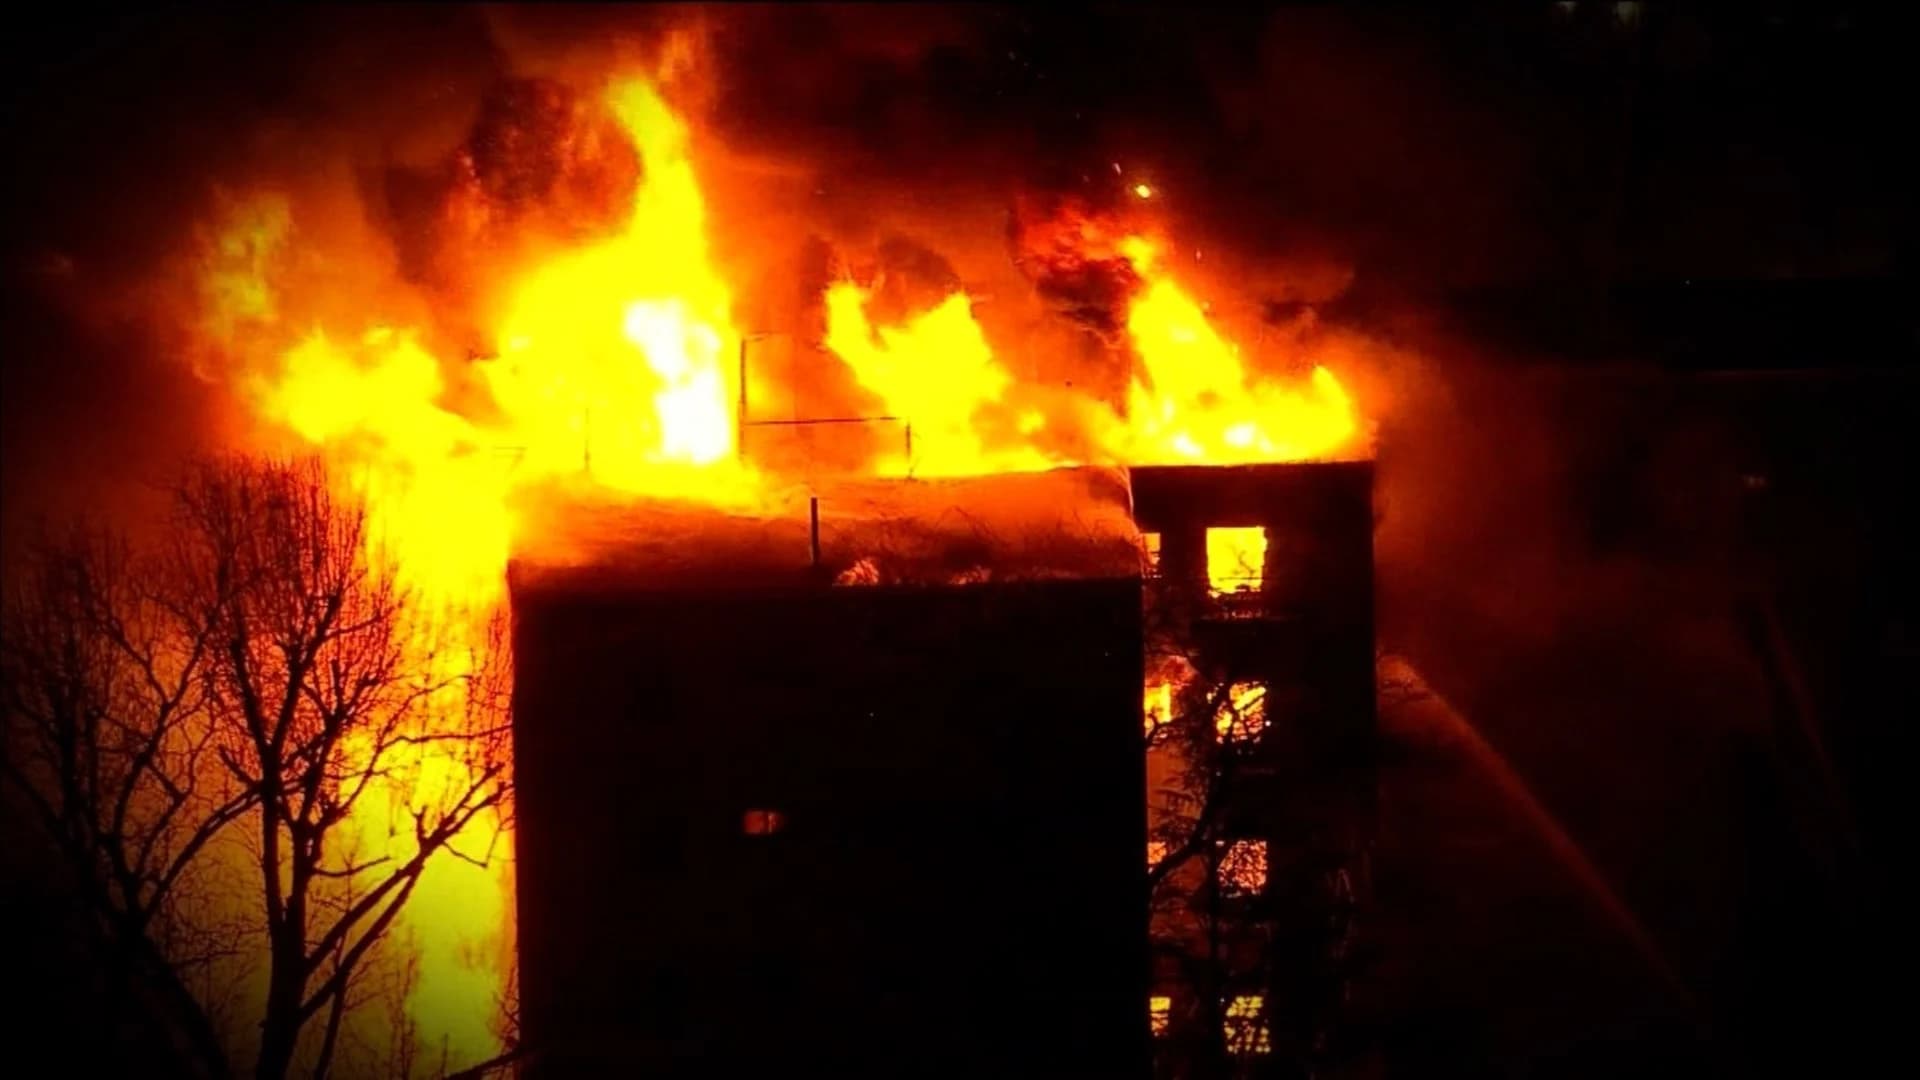 ‘My whole life is in there’ – Massive fire destroys Fort Lee apartment building